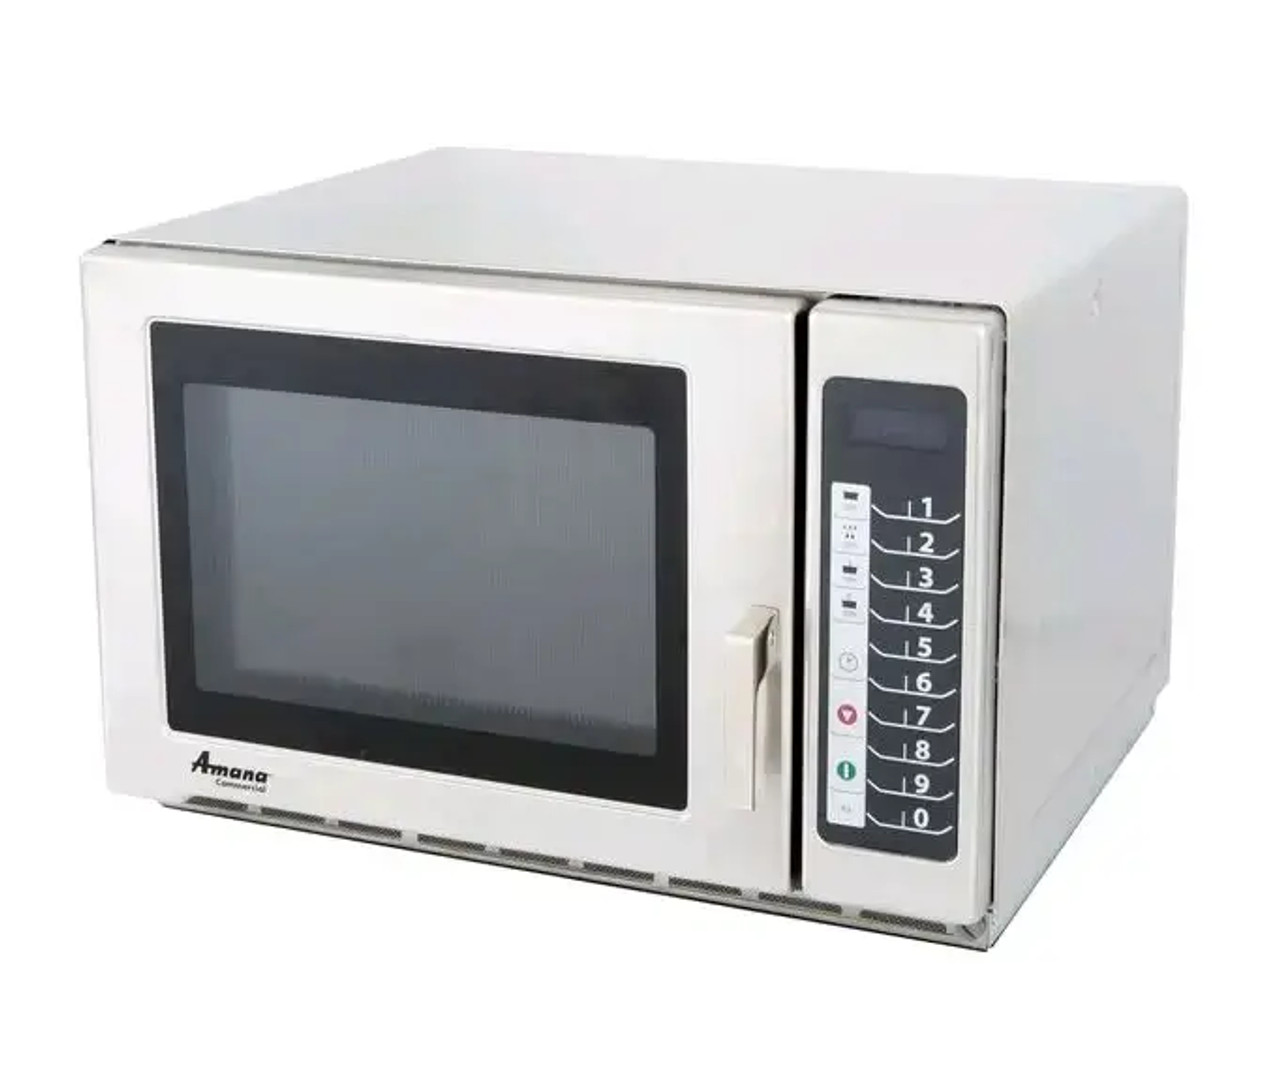 Amana Heavy Duty Stainless Steel Commercial Microwave - 208/240V, 1800W | Power and Precision for Professional Kitchens